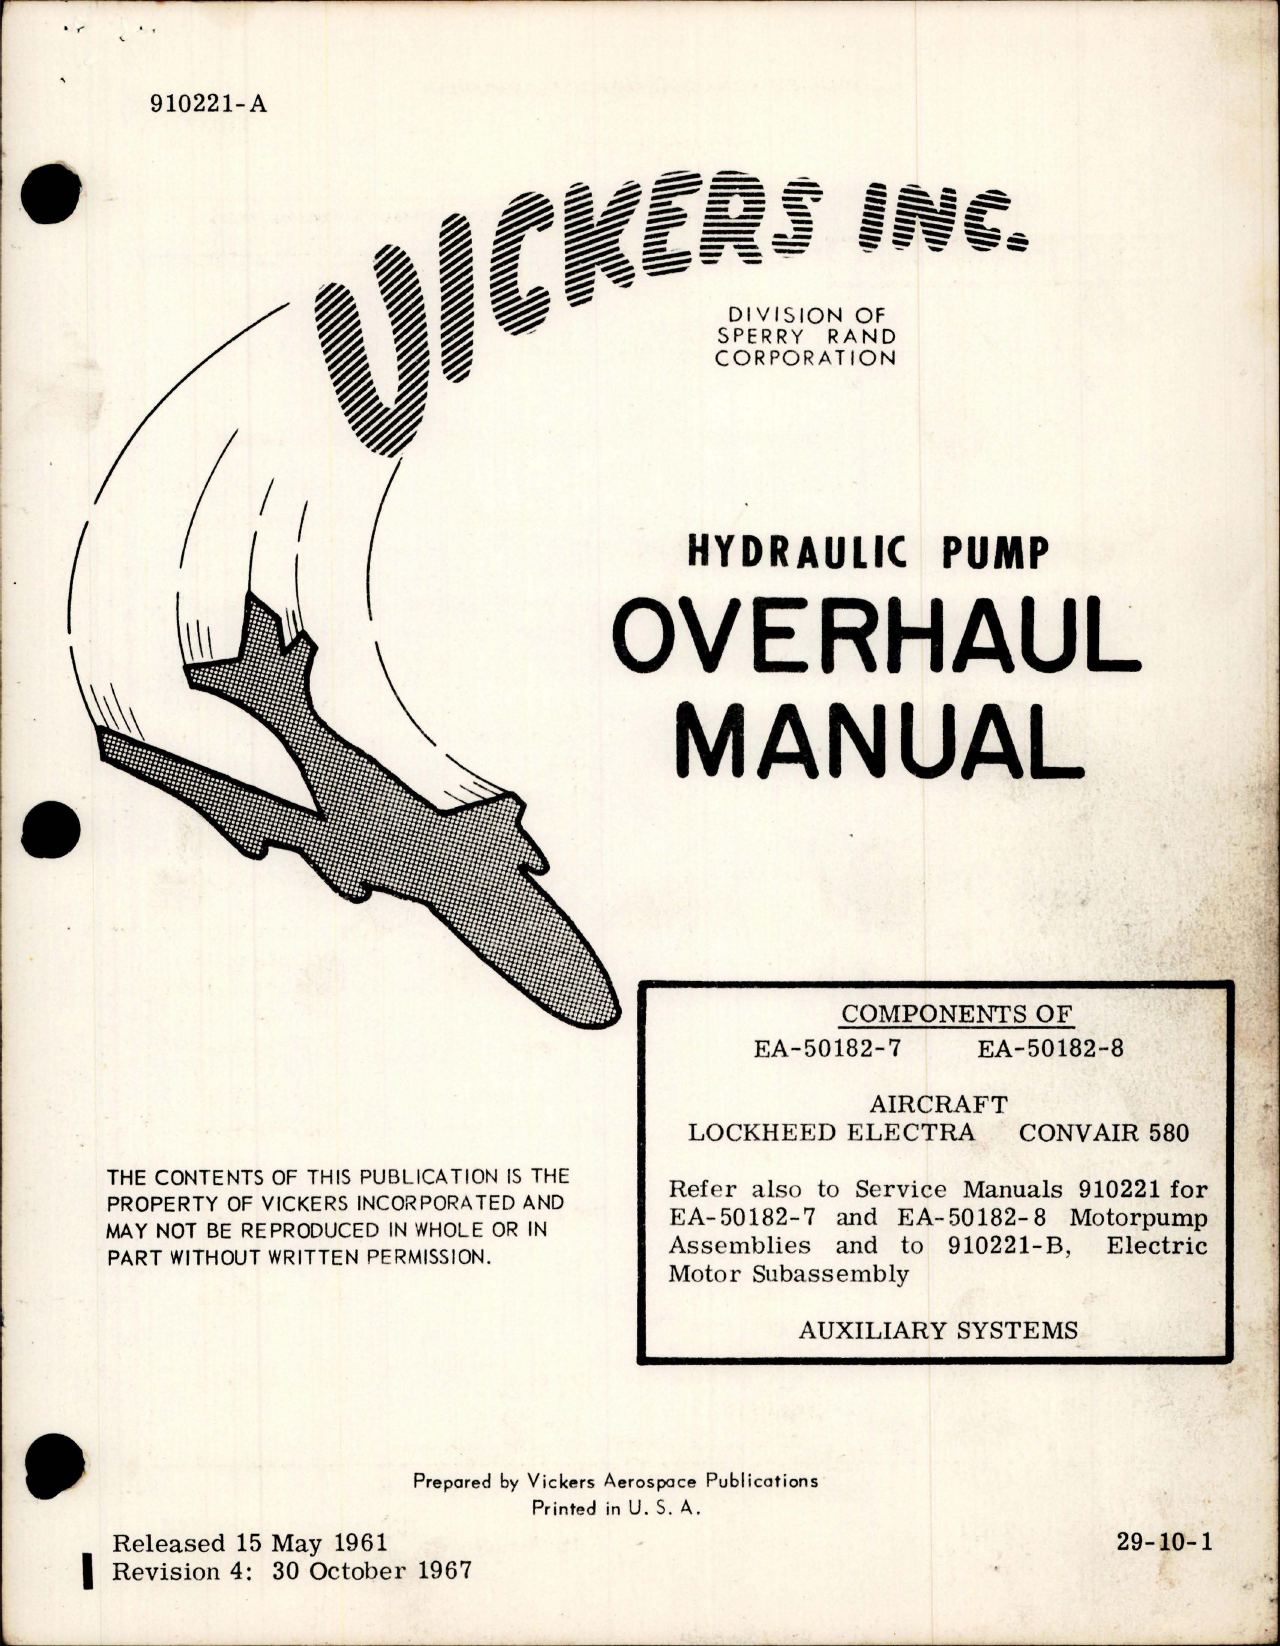 Sample page 1 from AirCorps Library document: Overhaul Manual for Hydraulic Motorpump - Models EA-50182-7 and EA-50182-8 - Revision 4 